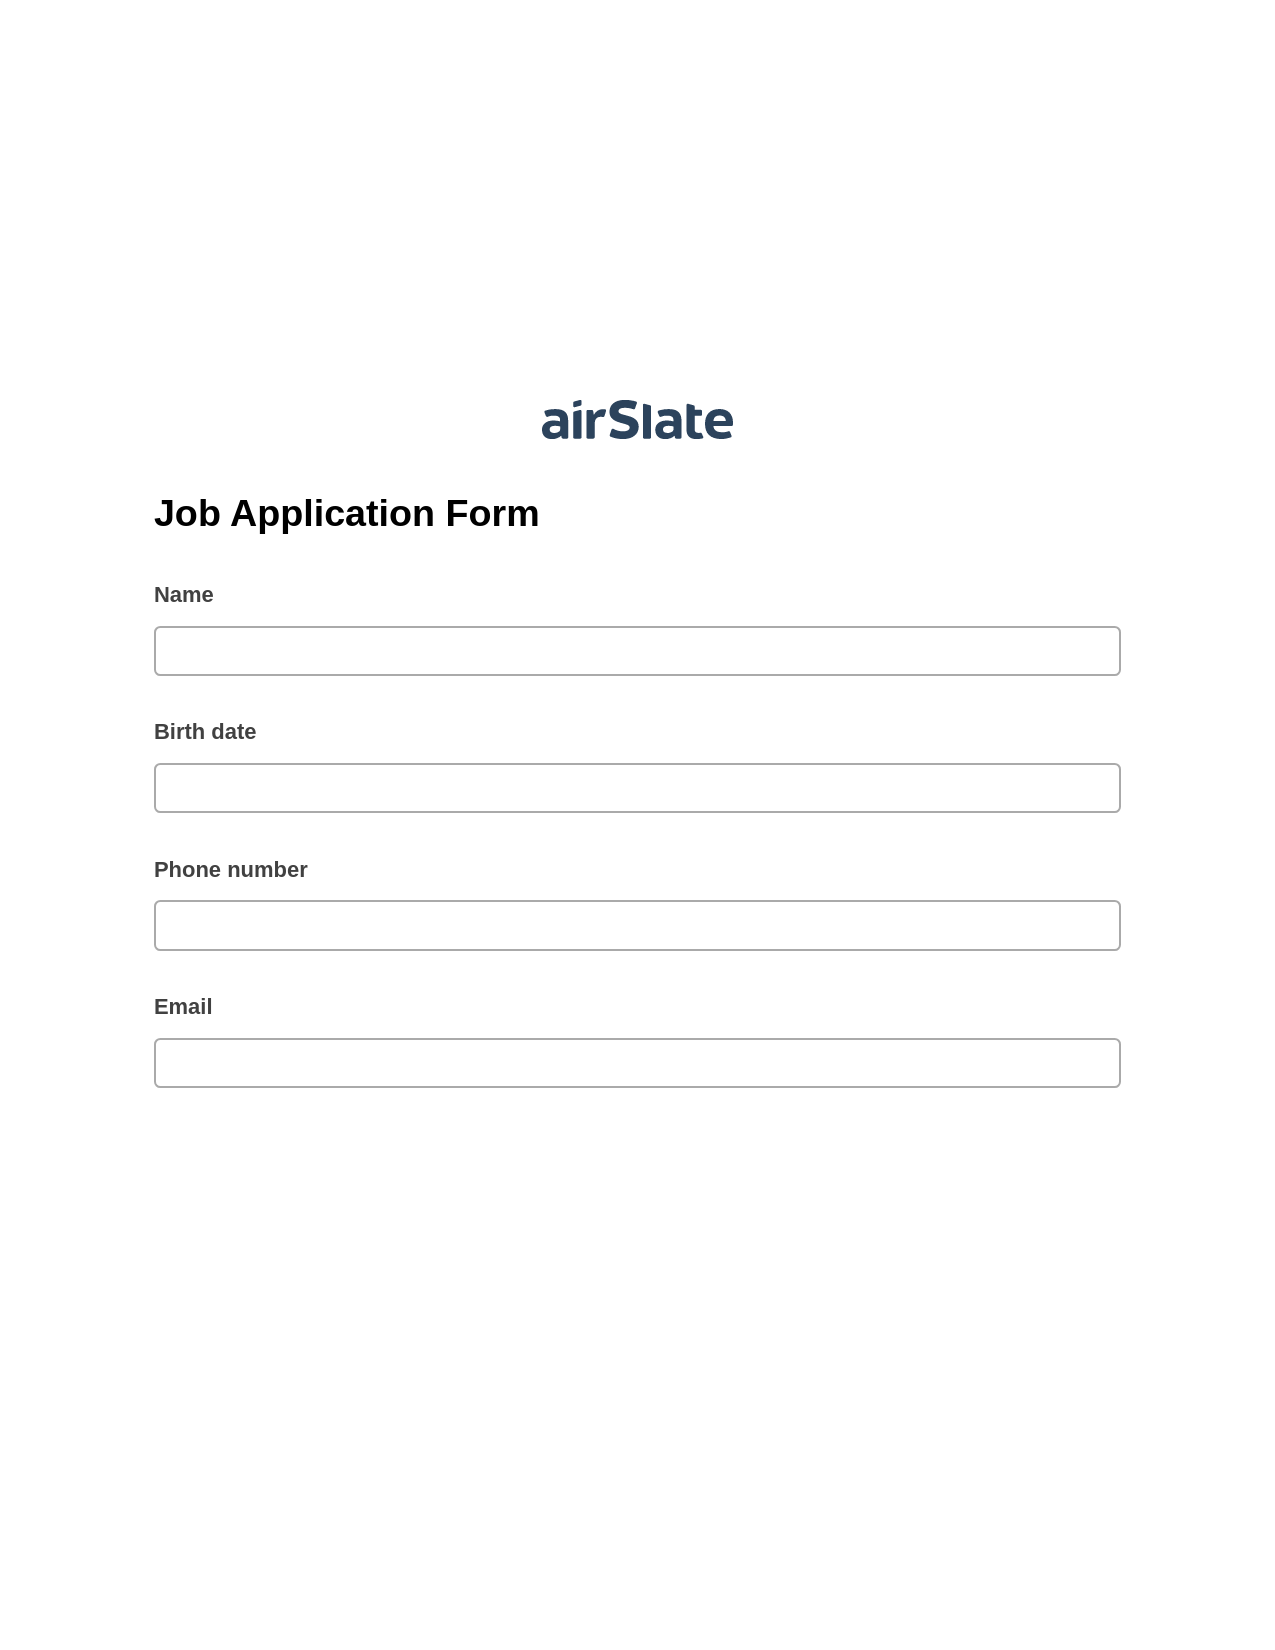 Job Application Form Pre-fill Document Bot, Update NetSuite Records Bot, Export to Google Sheet Bot